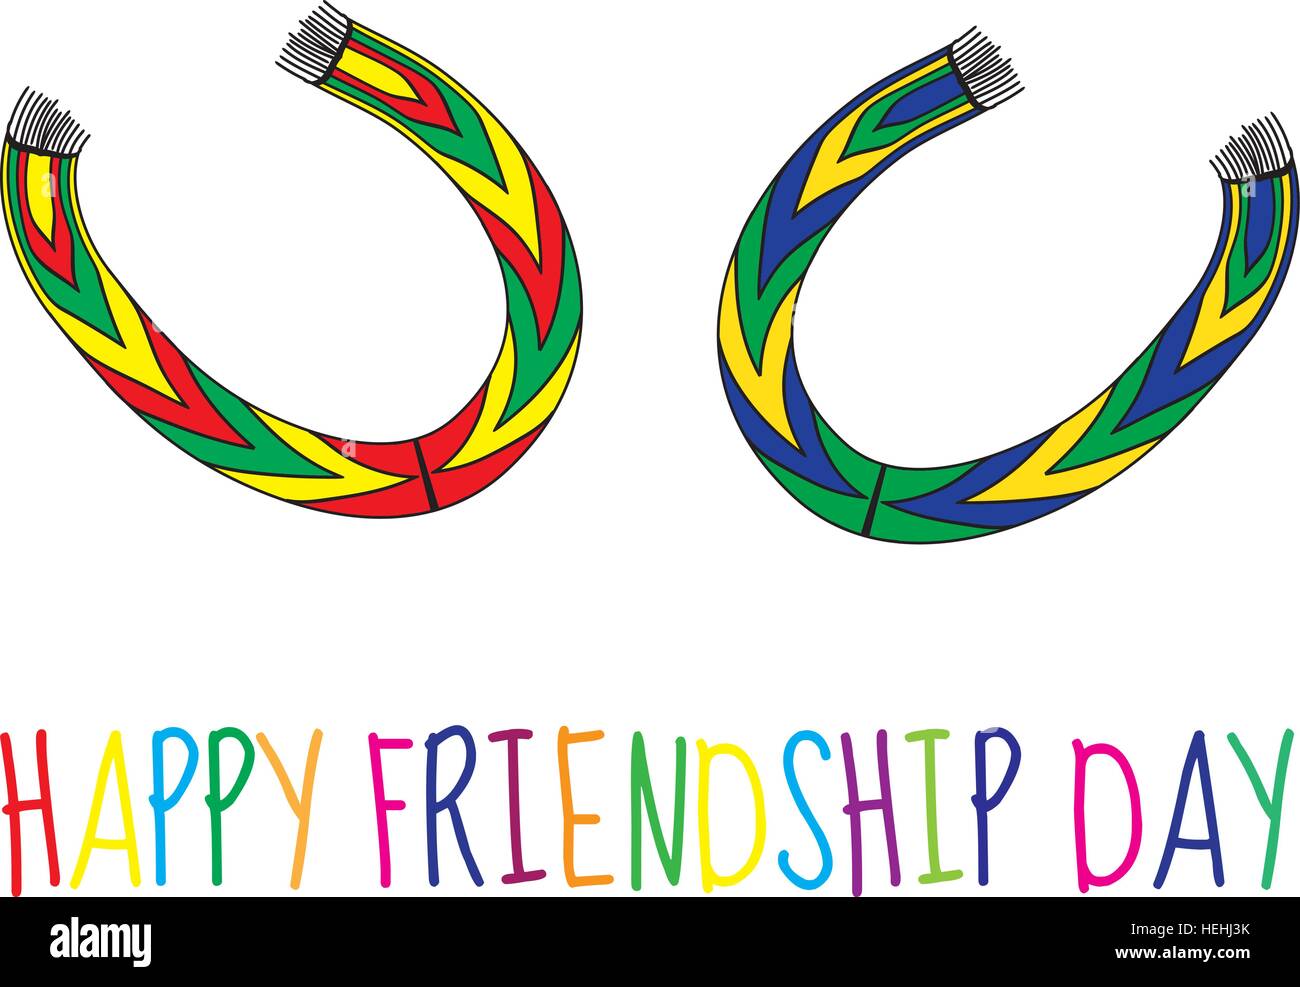 Greeting card with a happy friendship day. Greeting card with a friendship bracelet, wristband. Vector illustration Stock Vector